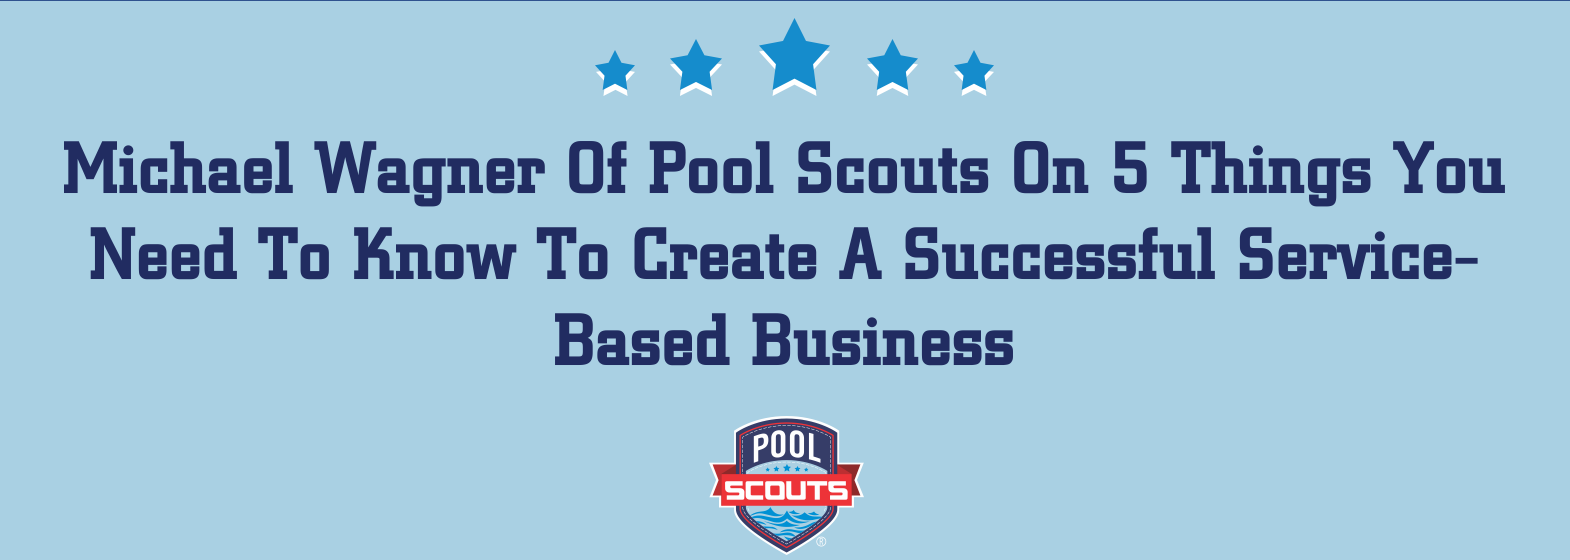 Image of Michael Wagner Of Pool Scouts On 5 Things You Need To Know To Create A Successful Service Based Business